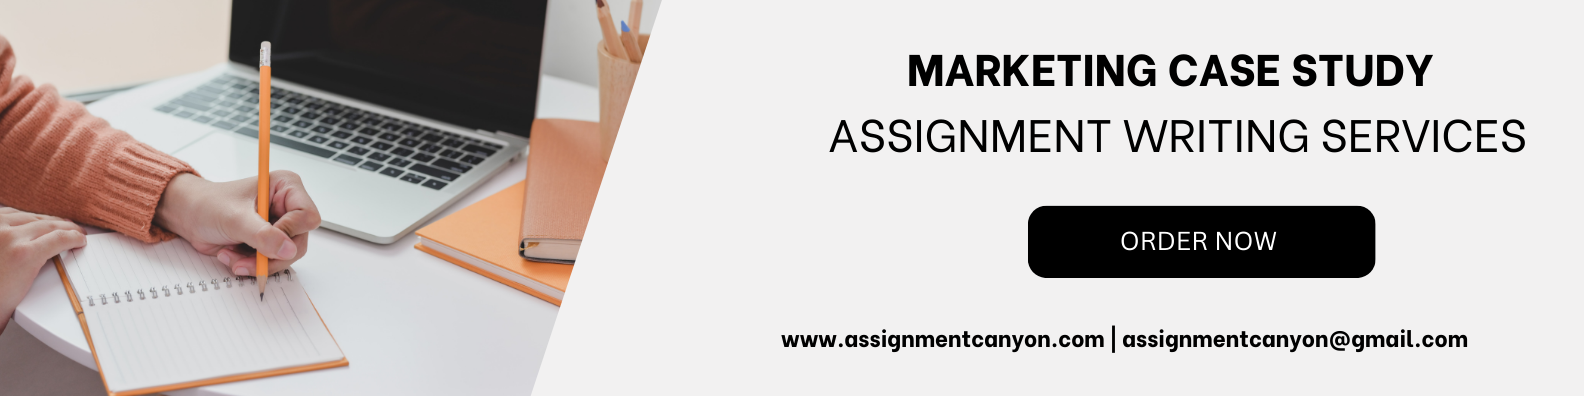 Get Affordable Marketing Case Study Assignment Writing Services from Assignment Canyon